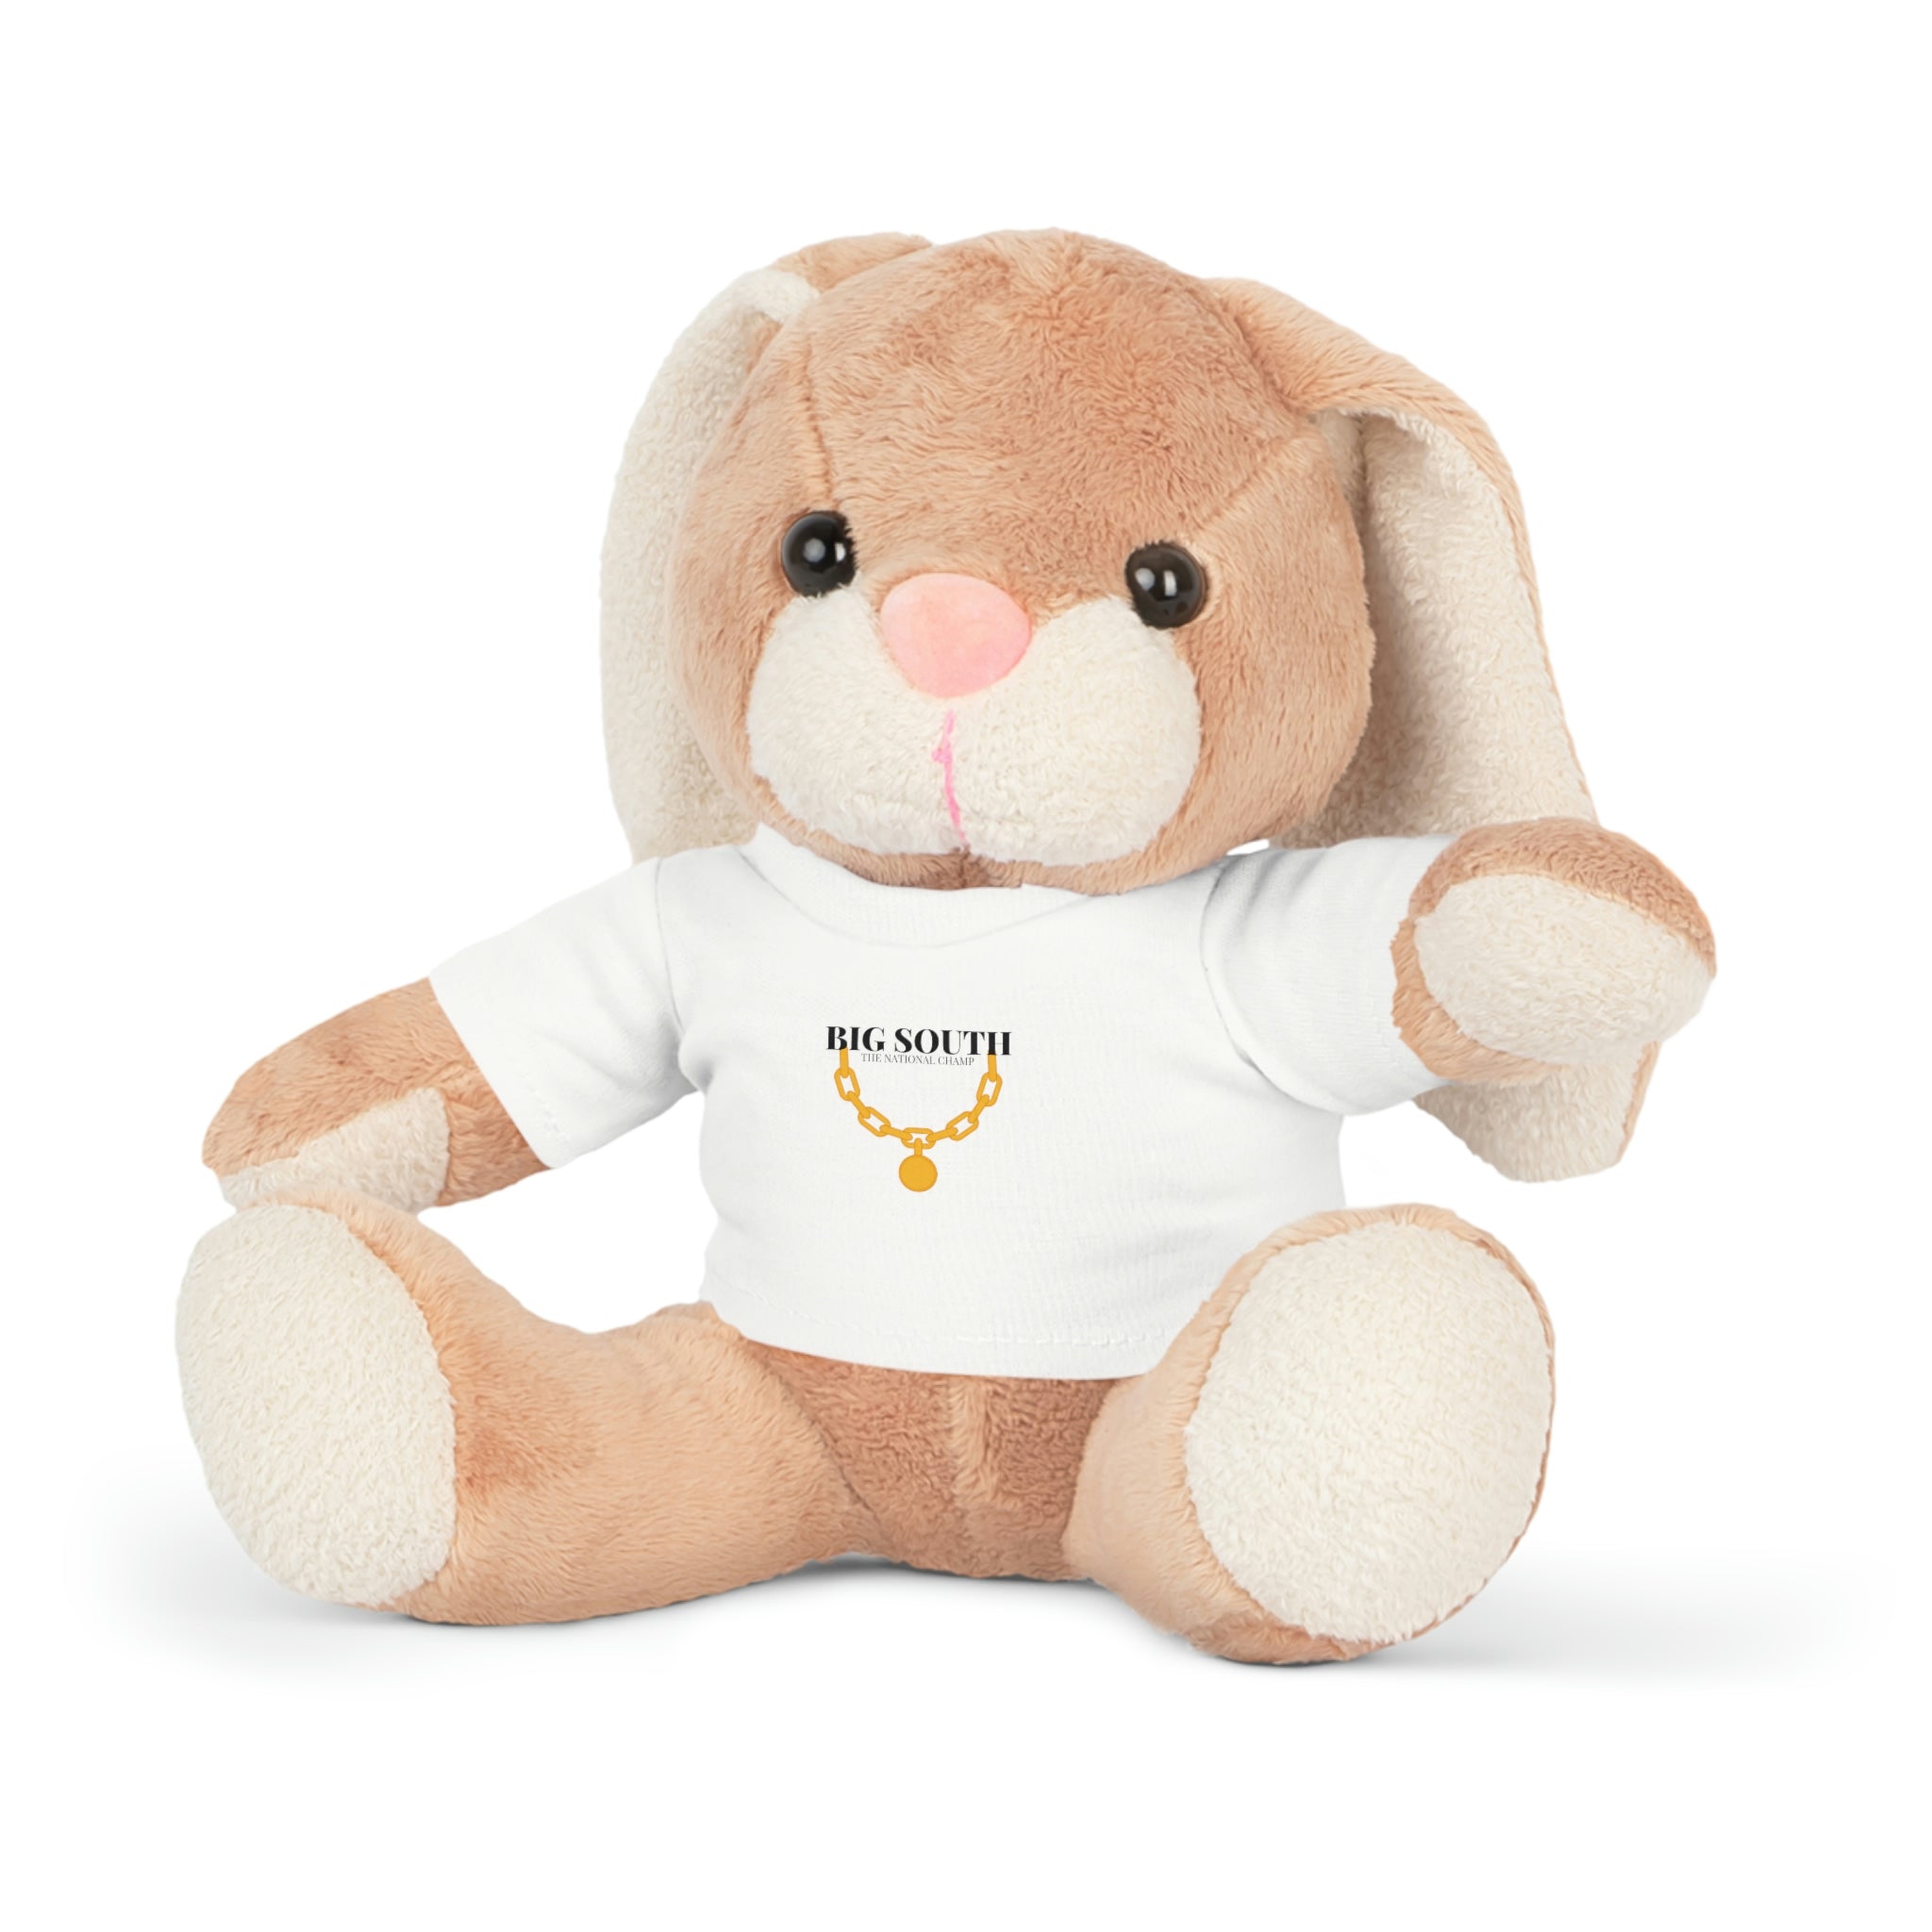 "Big South" Plush Toy with T-Shirt